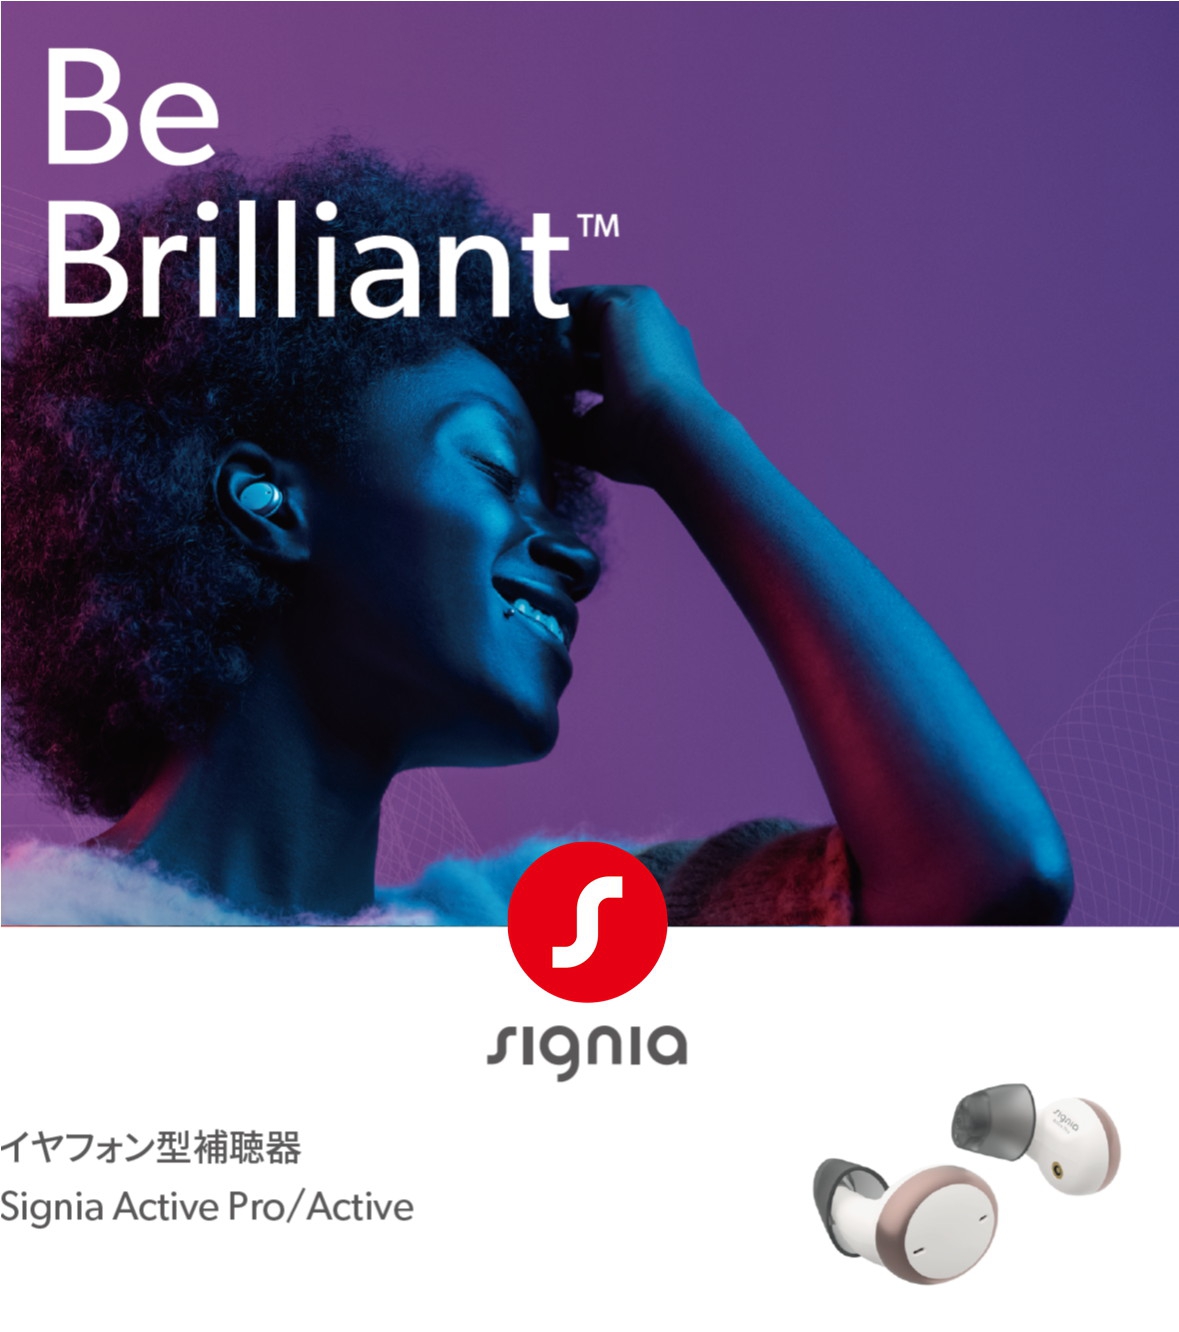 【Be BrilliantTM】イヤフォン型補聴器：Signia Active Pro/Active